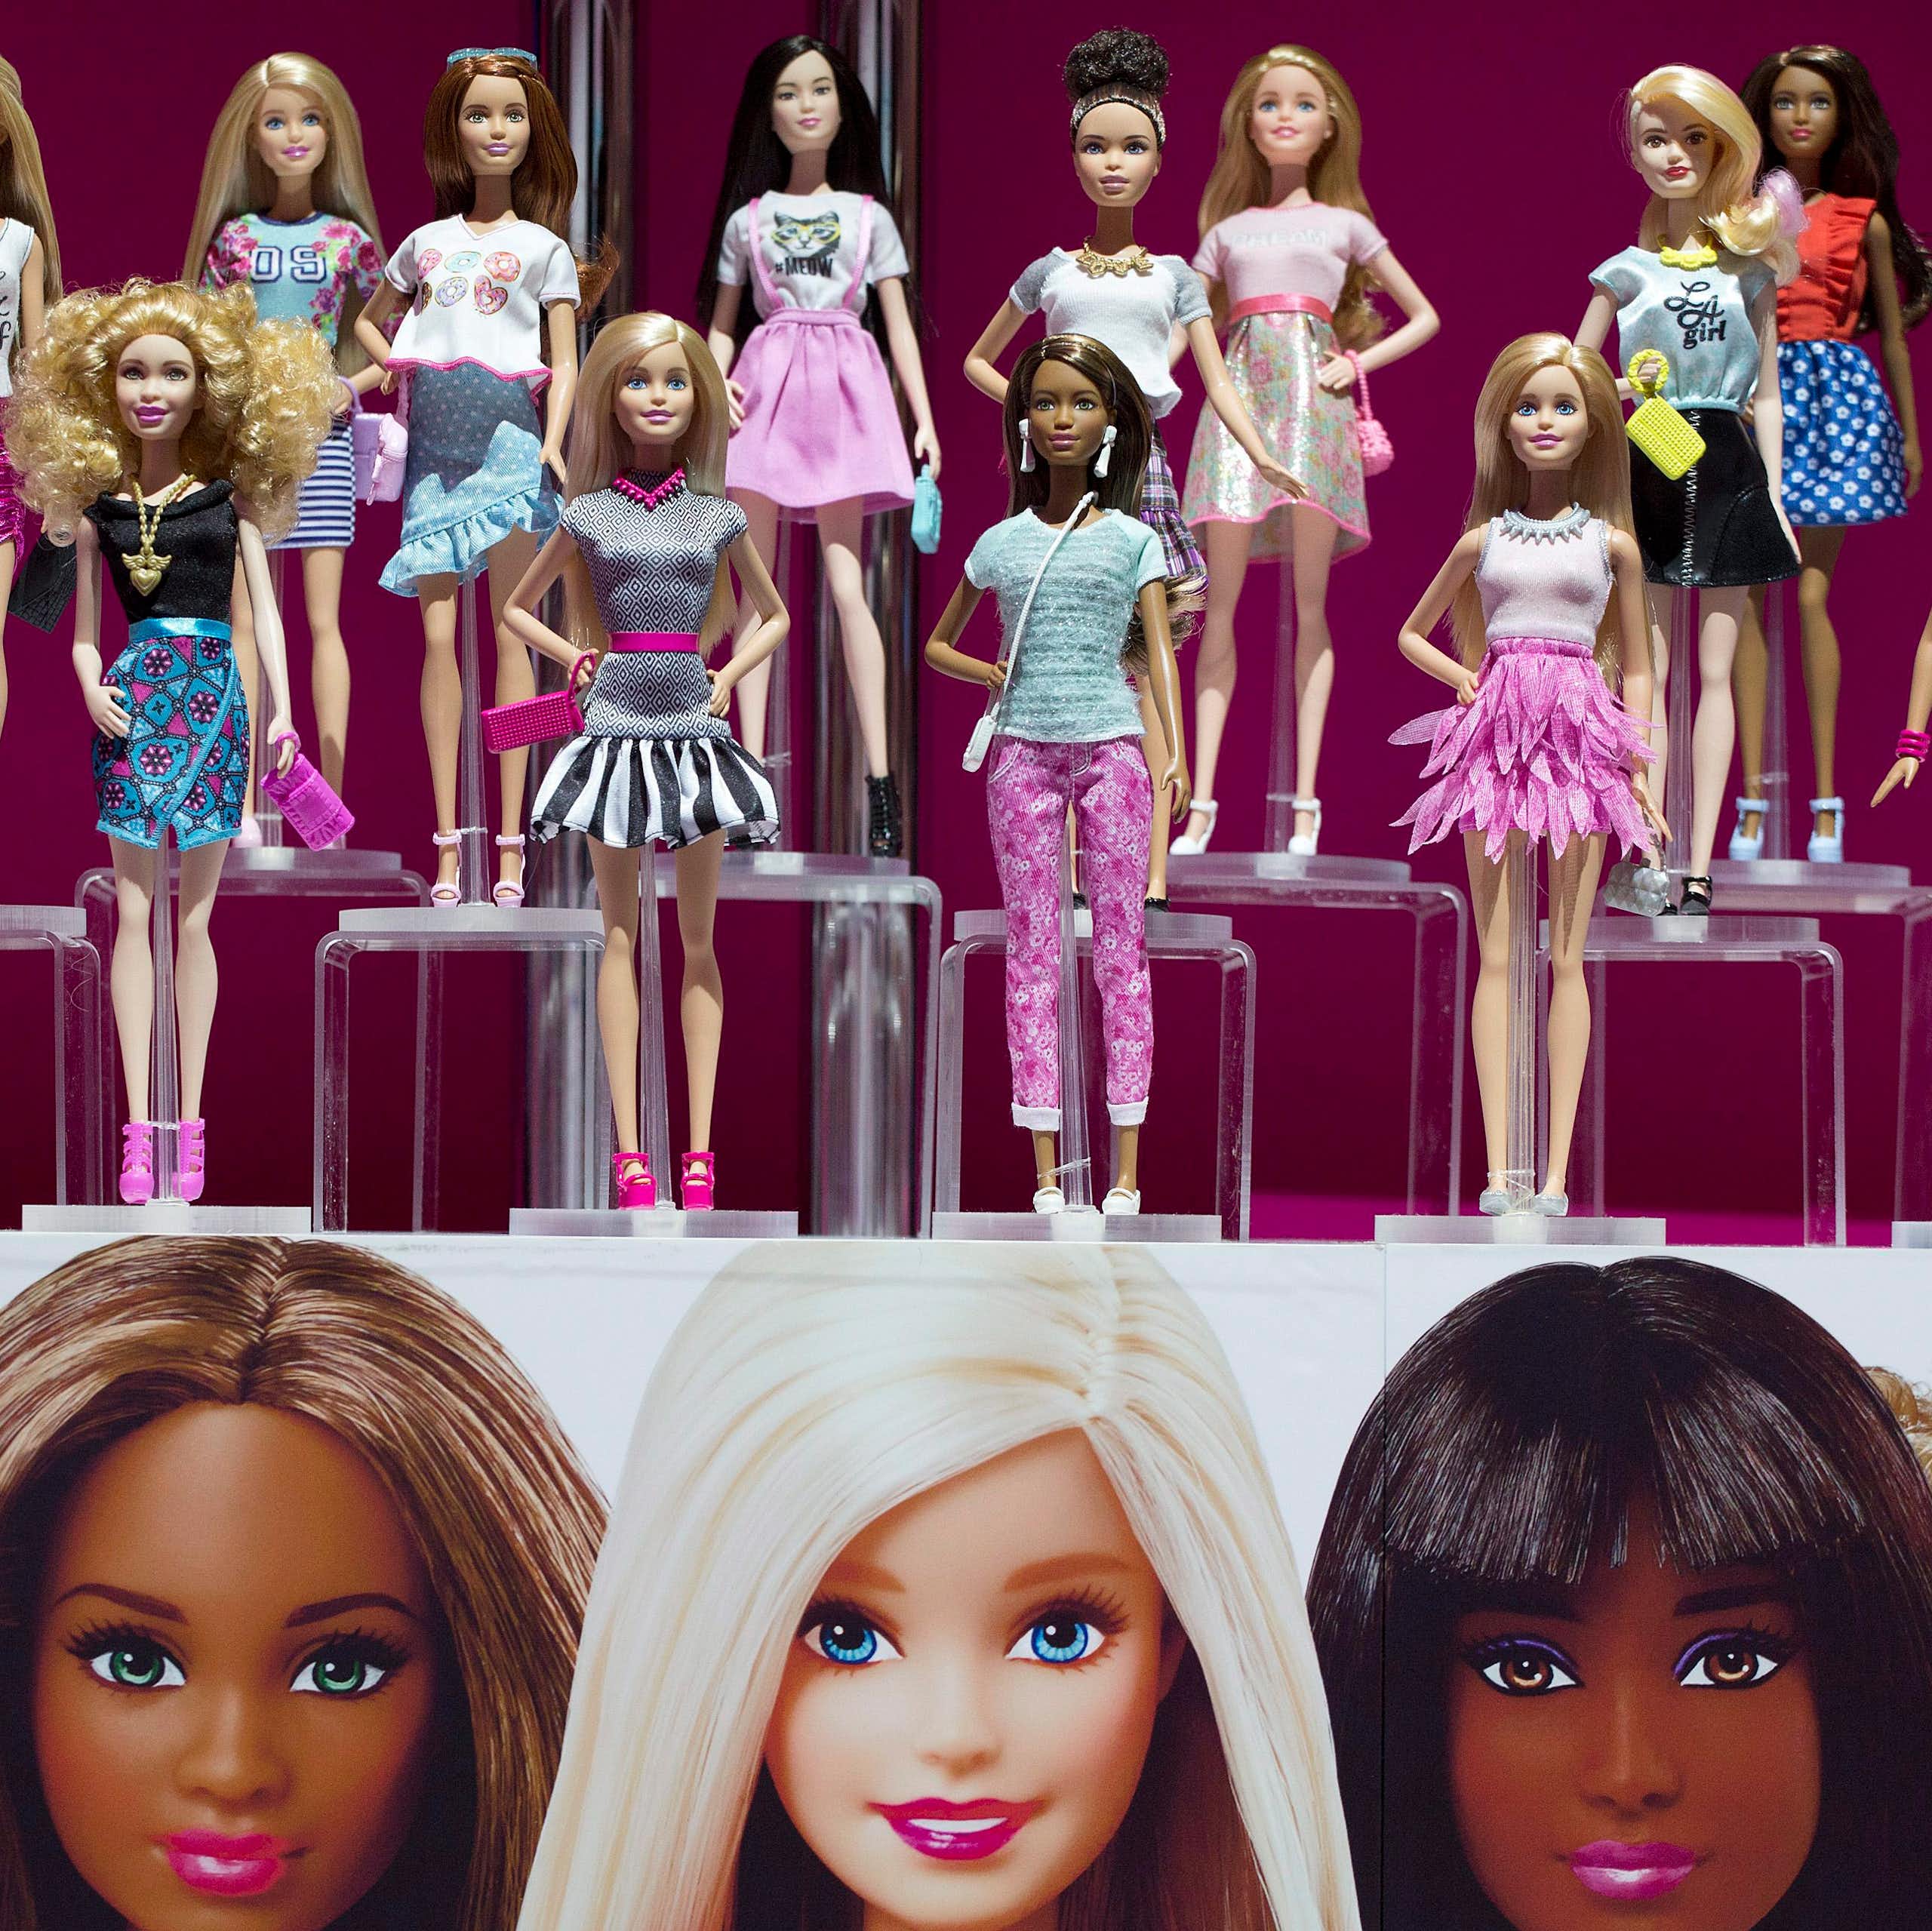 Two rows of plastic dolls with a range of skin colours stand on a display shelf